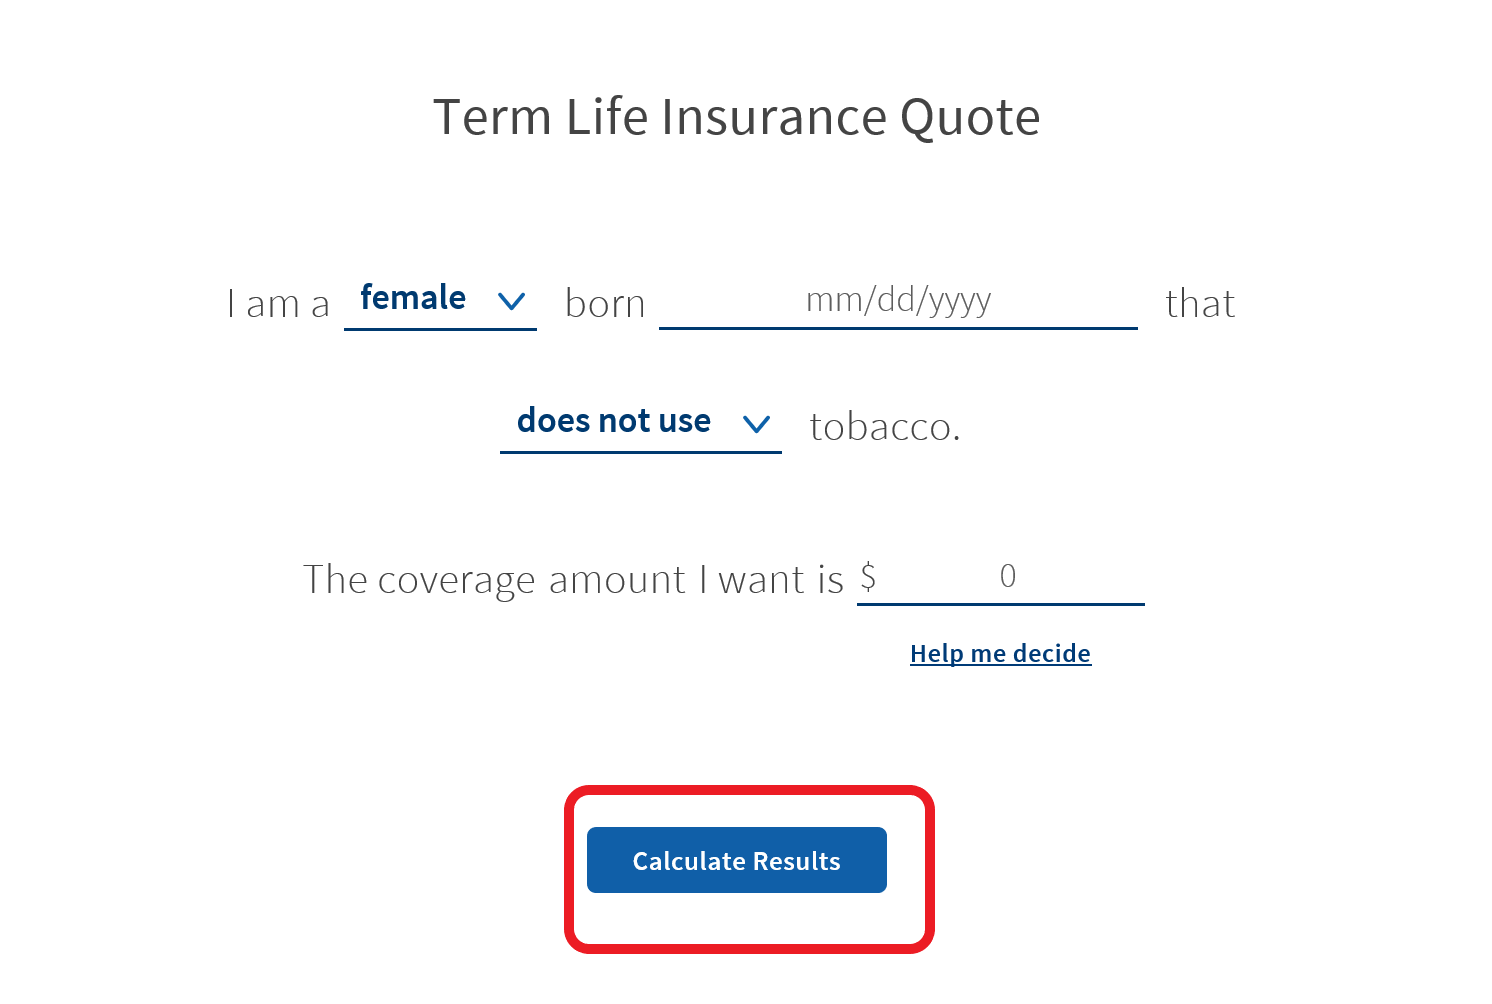 Mutual of Omaha Term Life Quote Form